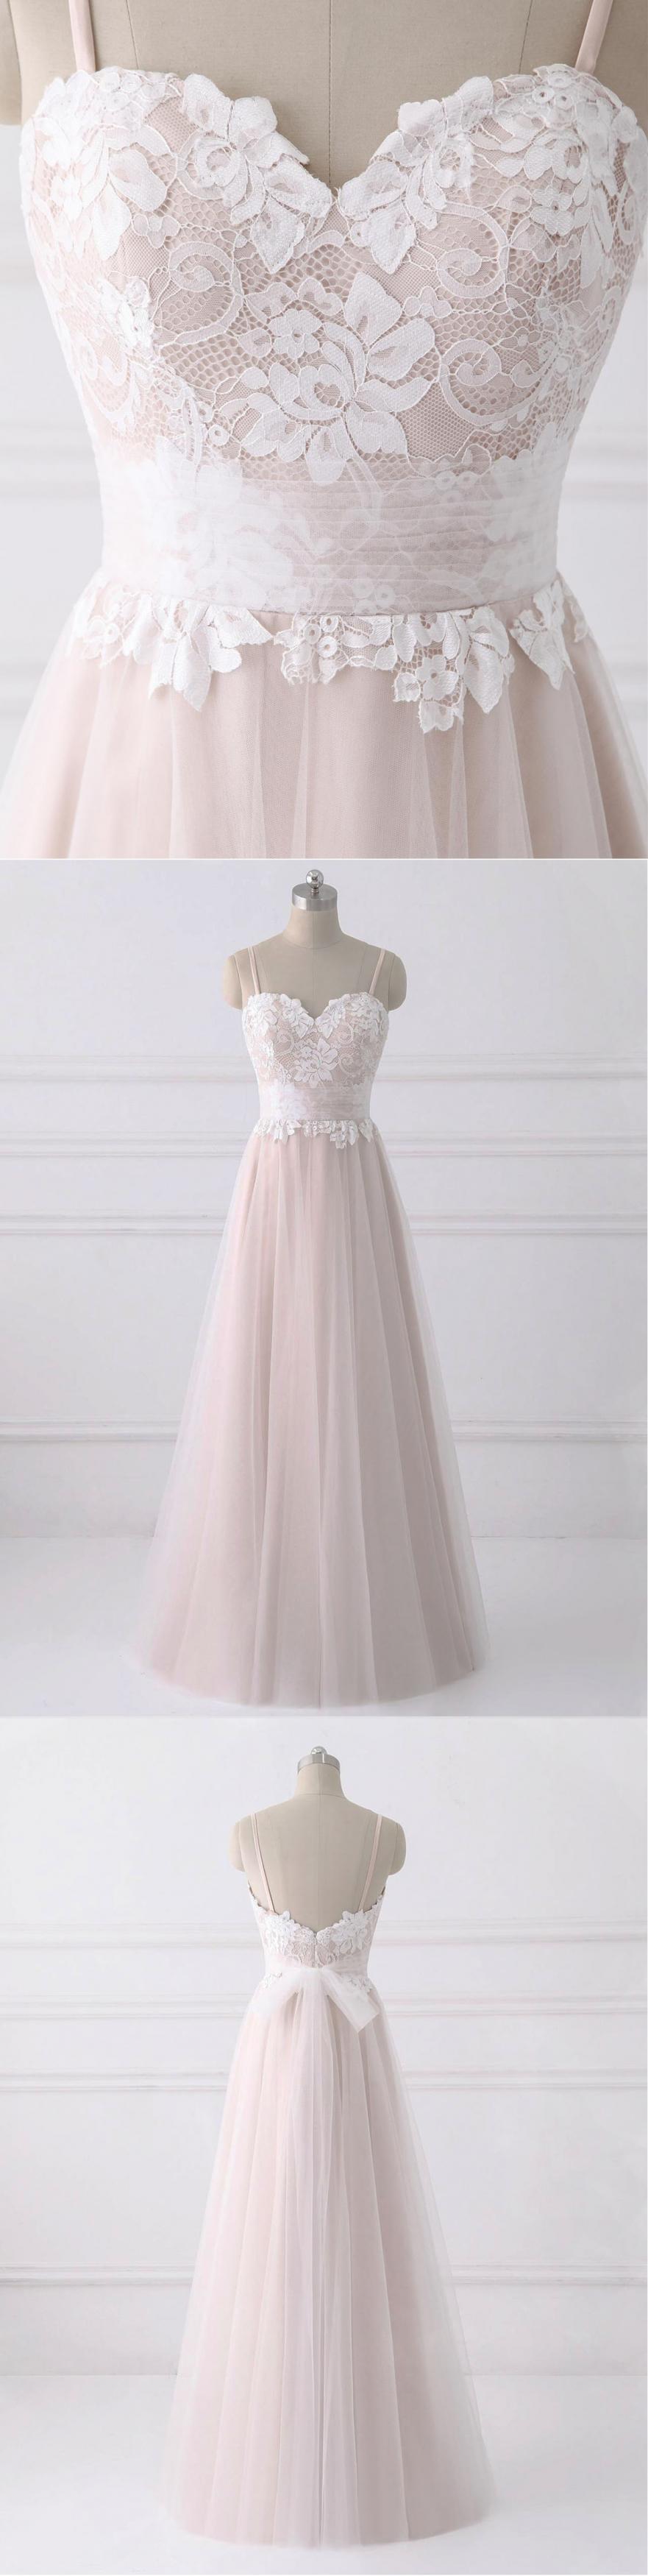 Creamy Tulle Spaghetti Straps Sweetheart Neck Lace Top Sweet 16 Prom Dresses